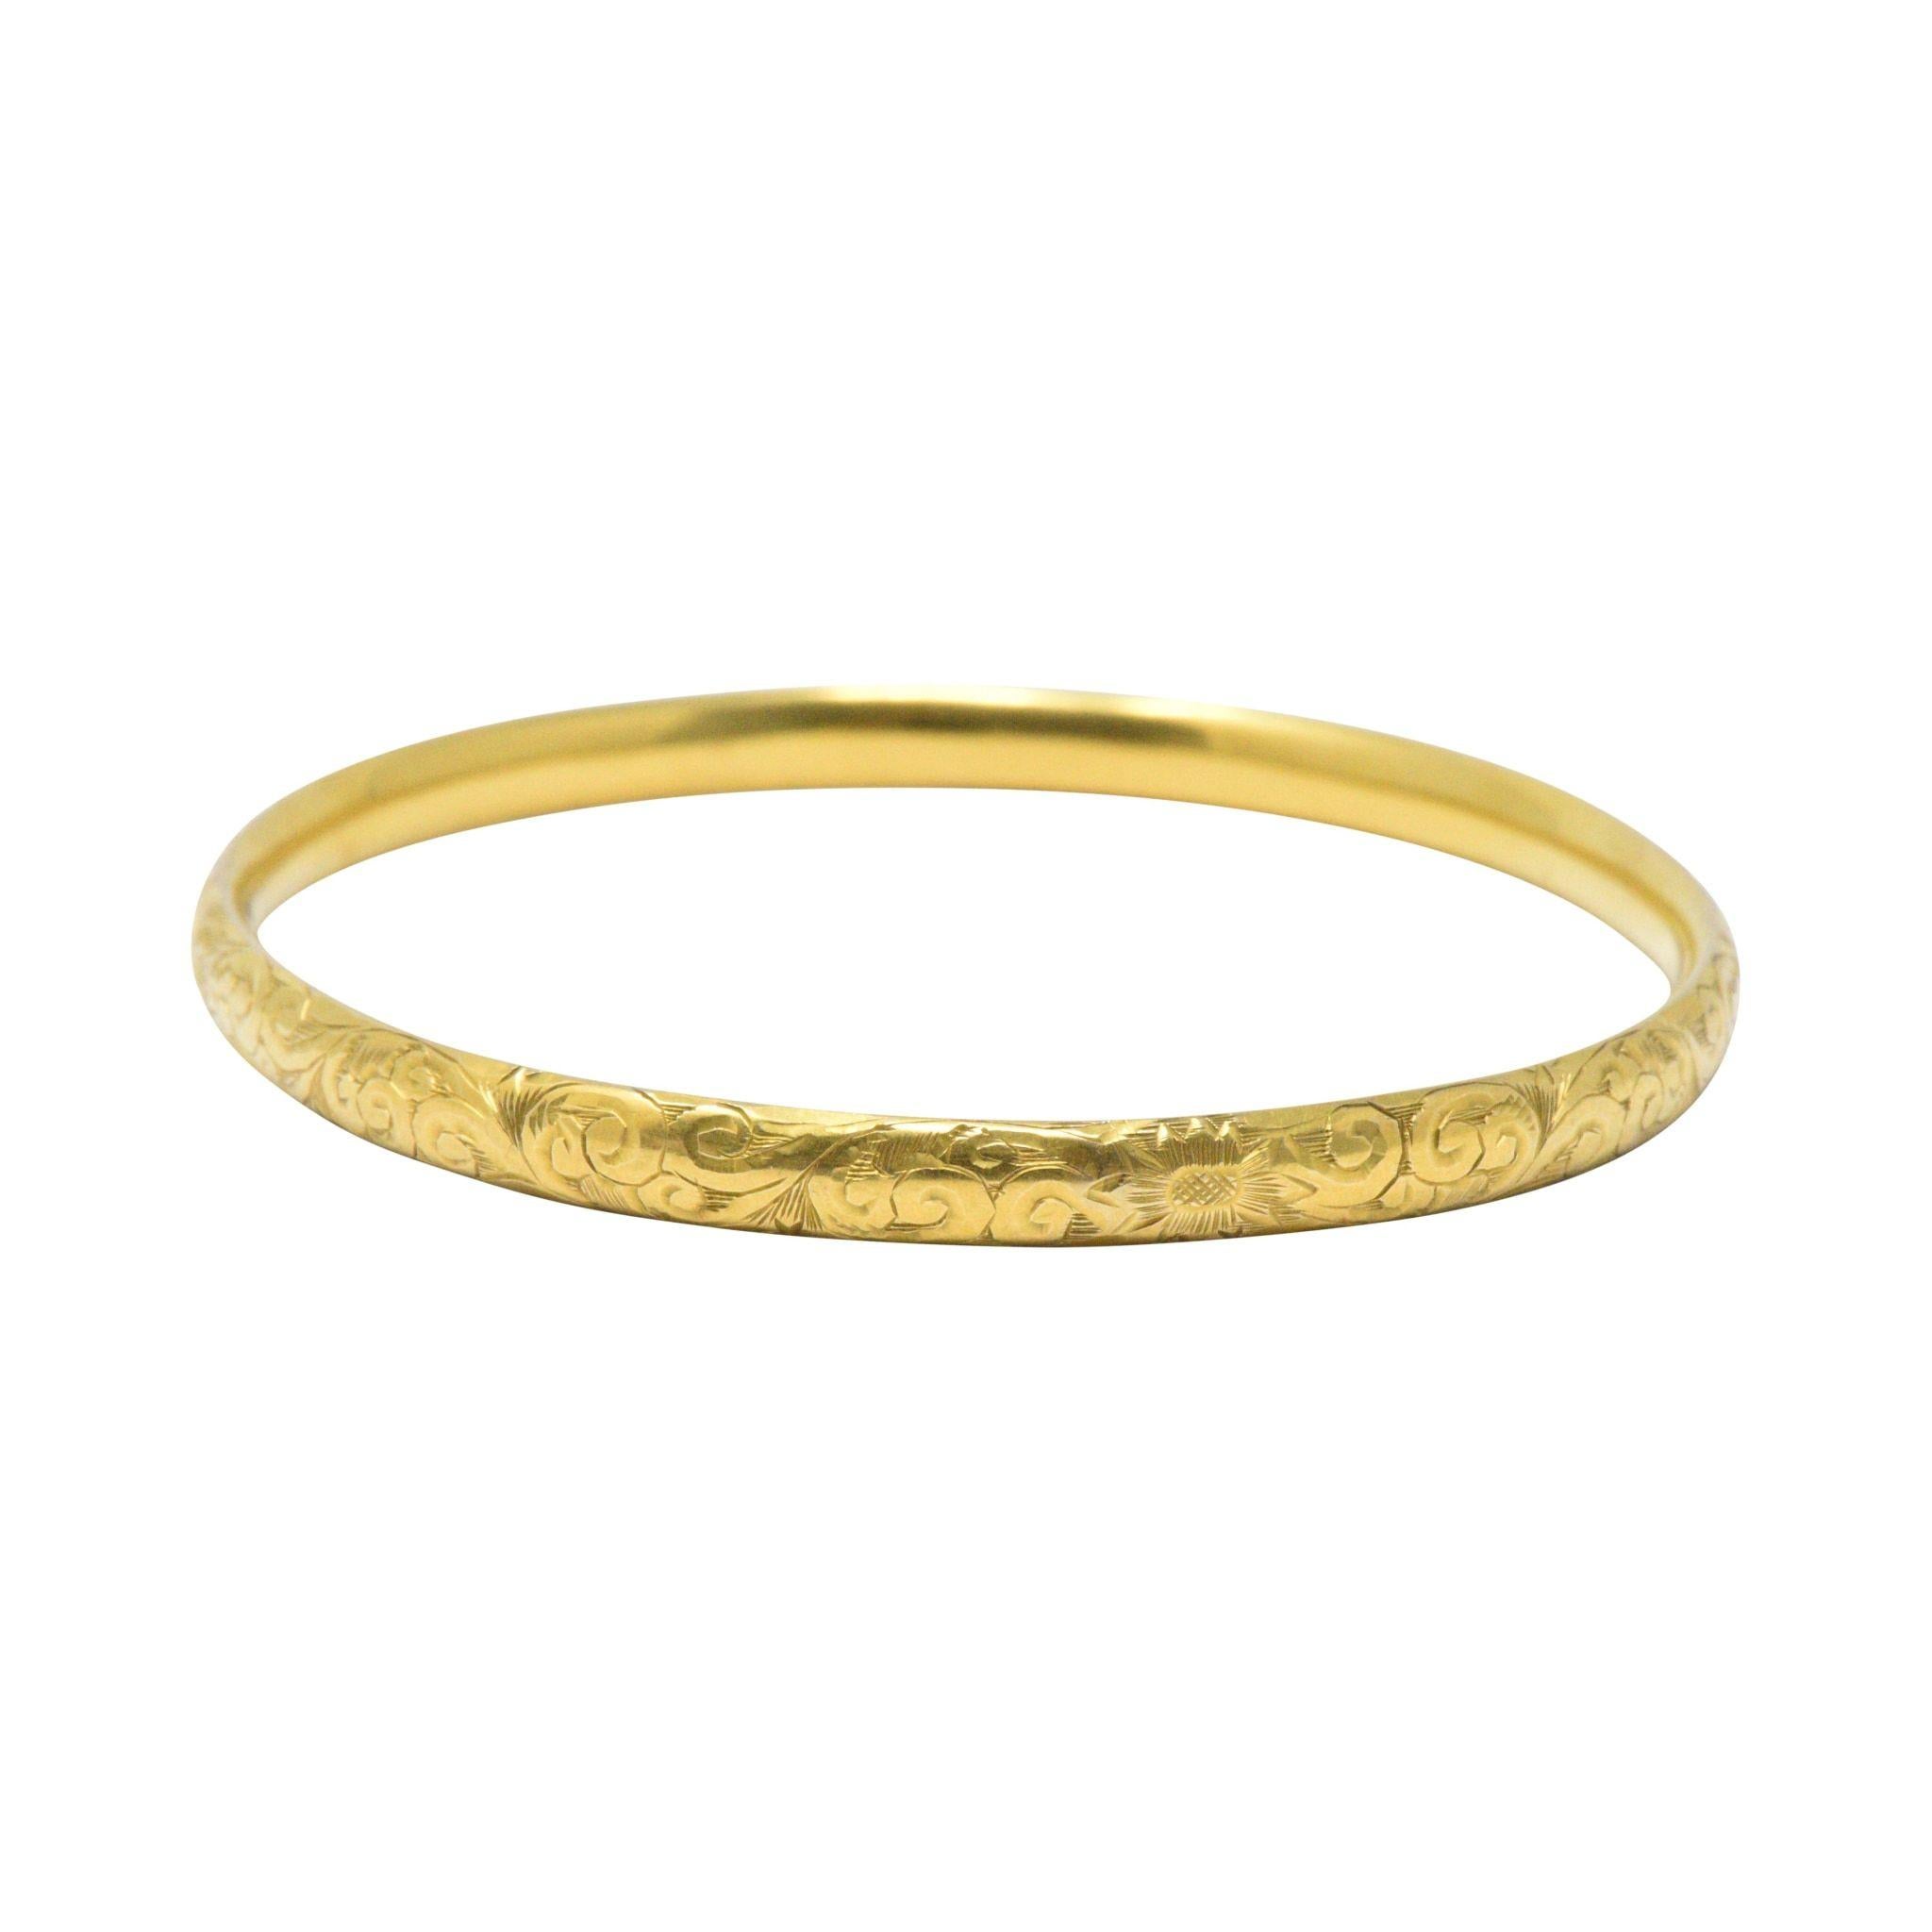 Narrow bangle with fantastic intricately hand engraved foliate motif
Maker's mark for Simmons
Classic Art Nouveau delicate gold work
Inner Circumference: 7 1/2 inches, Width: 4.6 mm
Total Weight: 6.1 Grams
Delicate. Floral. Sweet. 
Circa 1900
 

